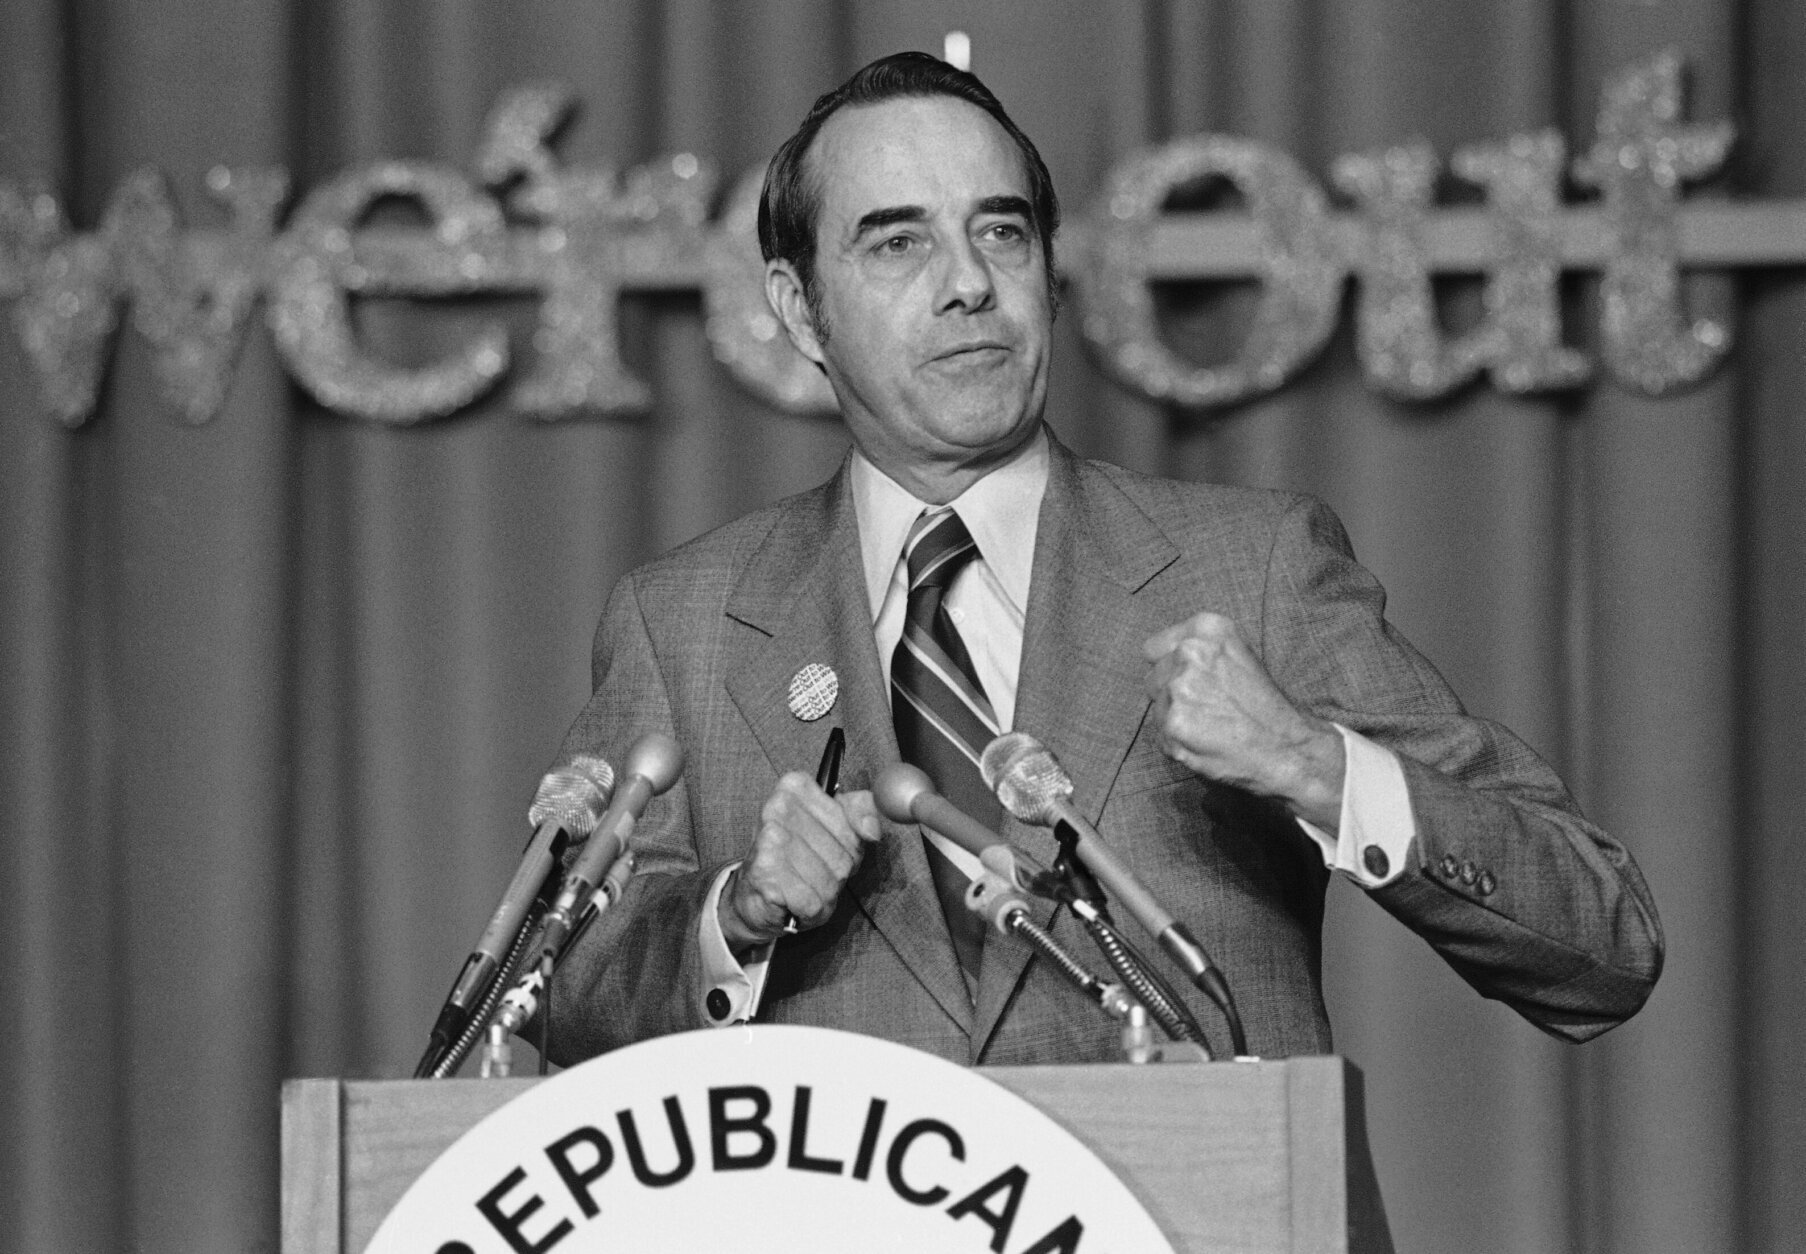 Sen. Robert Dole of Kansas, a former GOP national chairman, addresses the Republican Leadership Conference in Washington Friday, March 7, 1975. Dole said, "at least in terms of numbers the Republican Party is today in worse shape than it has ever been before in its history." The full sign behind him reads "we're out to win". (AP Photo)